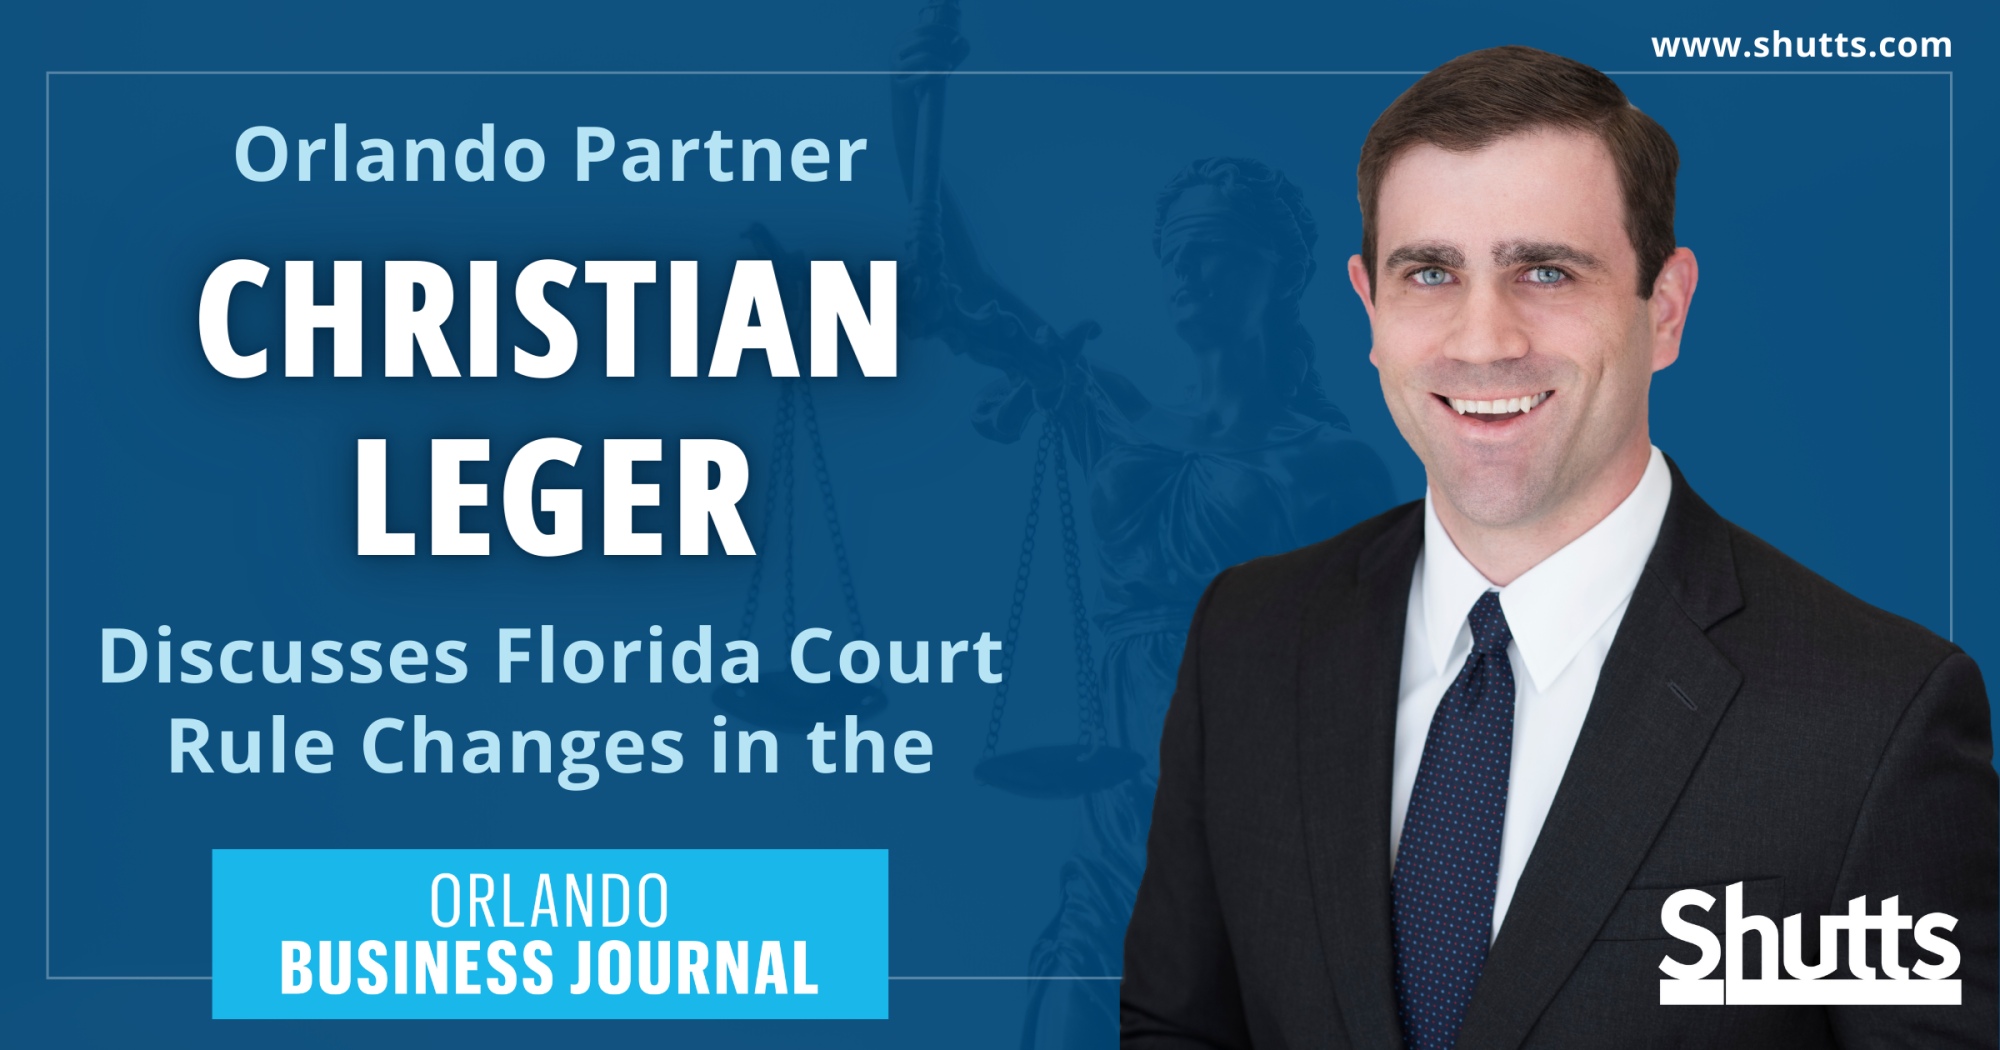 Orlando Partner Christian Leger Discusses the Florida Court Rule Changes in OBJ